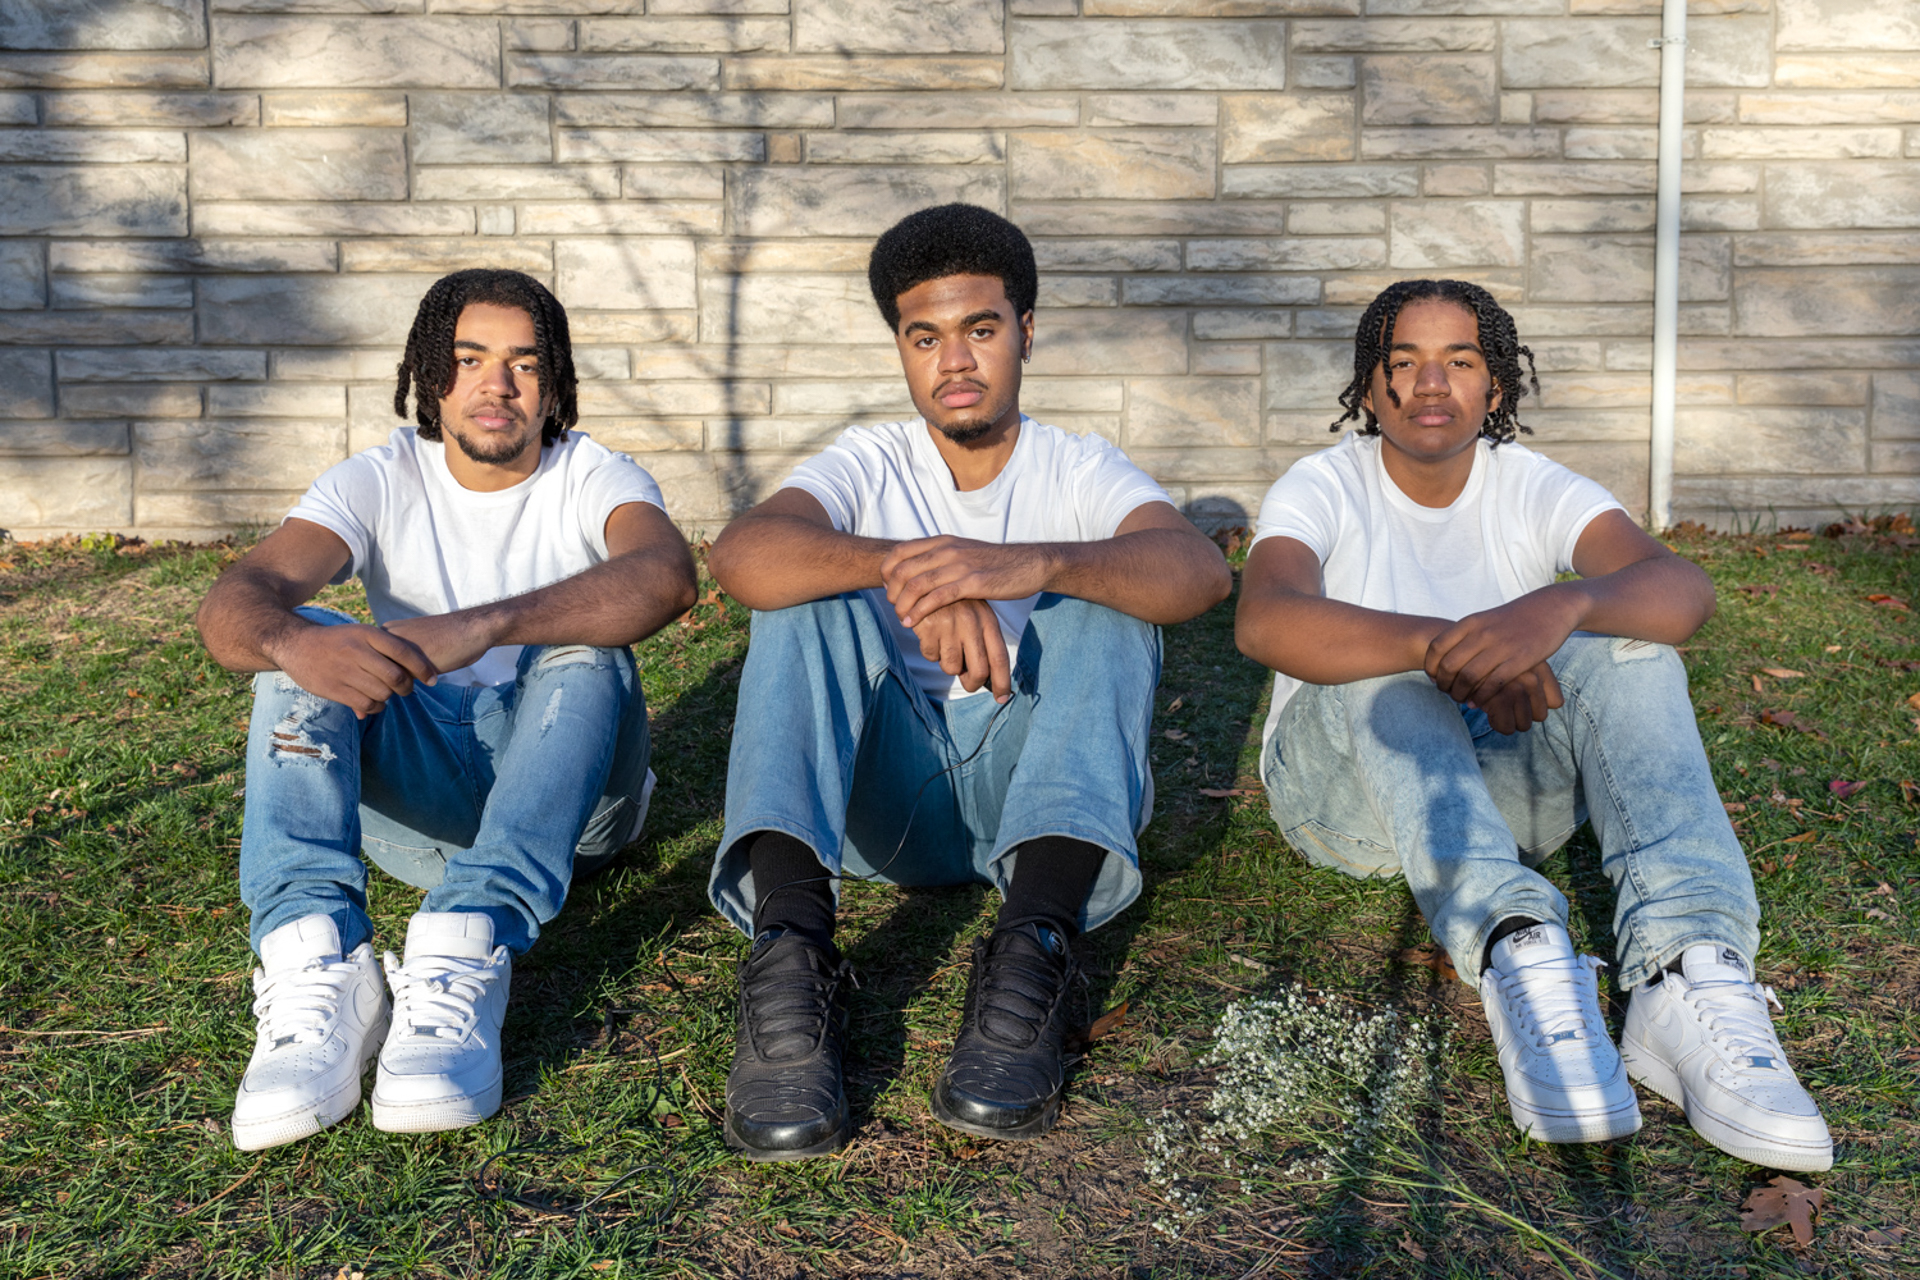 This photo consists of three Black men who are sitting in a grass field on a bright day, all gazing into the camera. They are all wearing white short-sleeved shirts and light-blue jeans. They wear alternating color shoes; white, black, white. The same goes for their hair, the first is twisted, the second is an afro and the last is twisted as well. The three of their arms are crossed over their knees, the man in the middle holds a black shutter release cable and a bunch of Baby’s Breath flowers lay to the right of him.